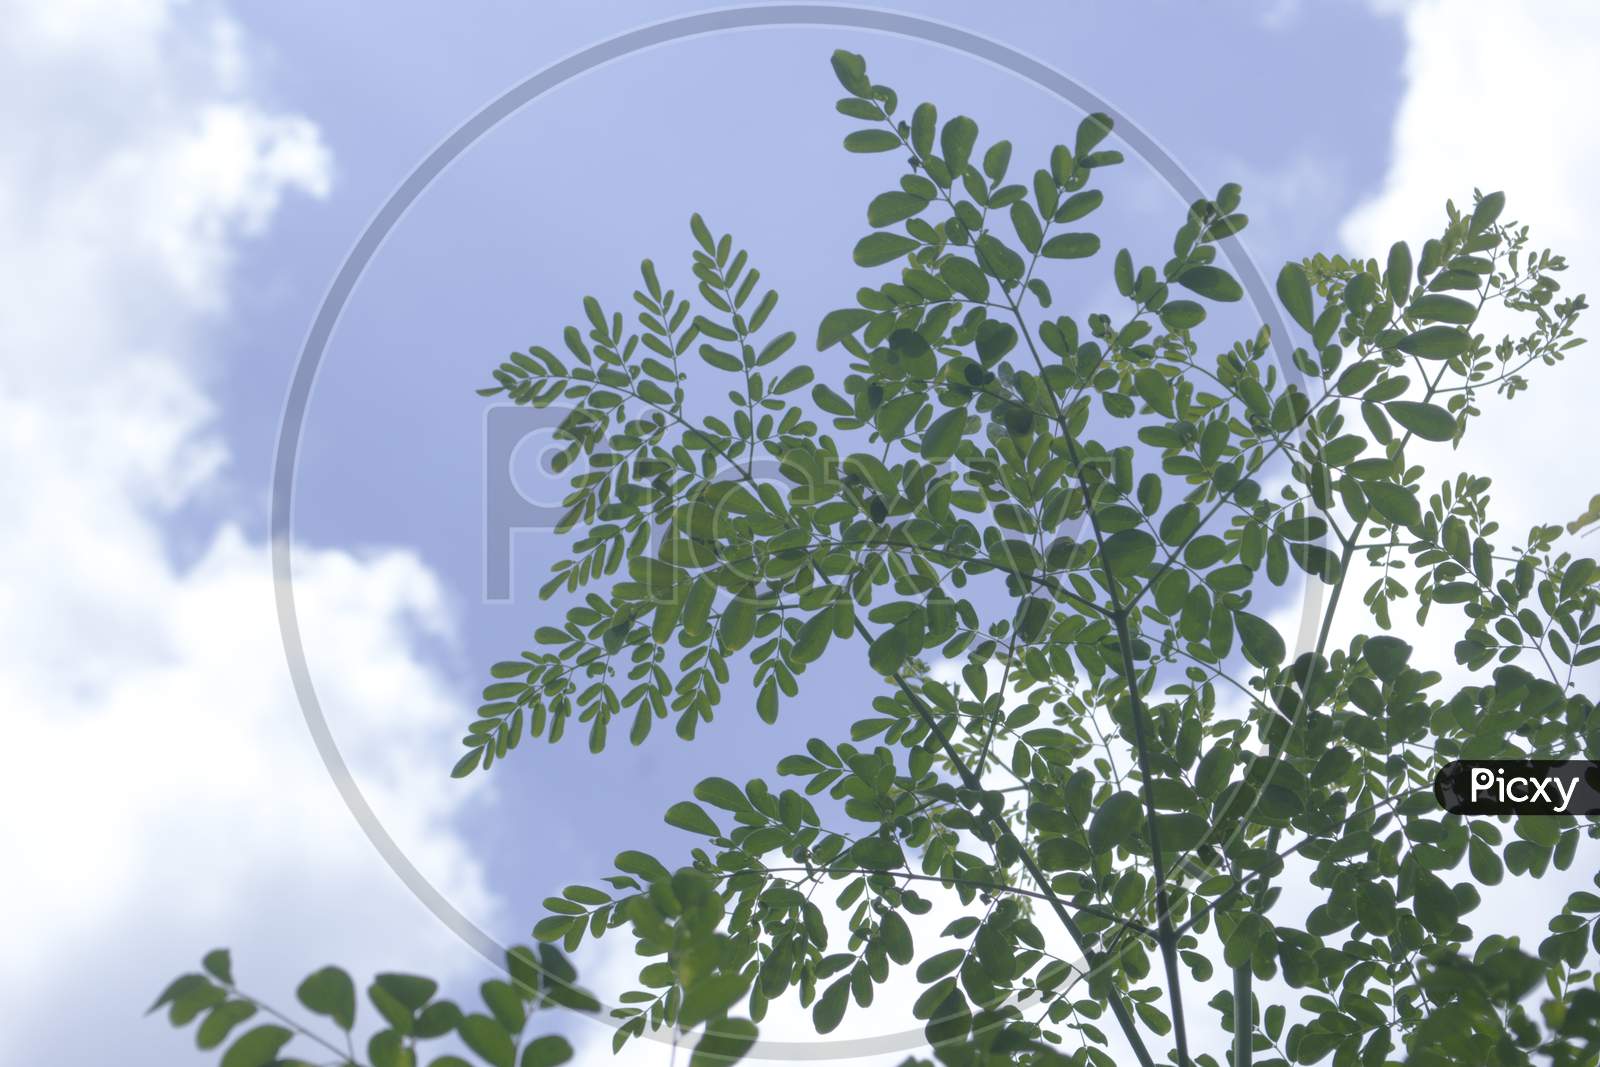 Moringa Leaves And Twigs With Cloudy